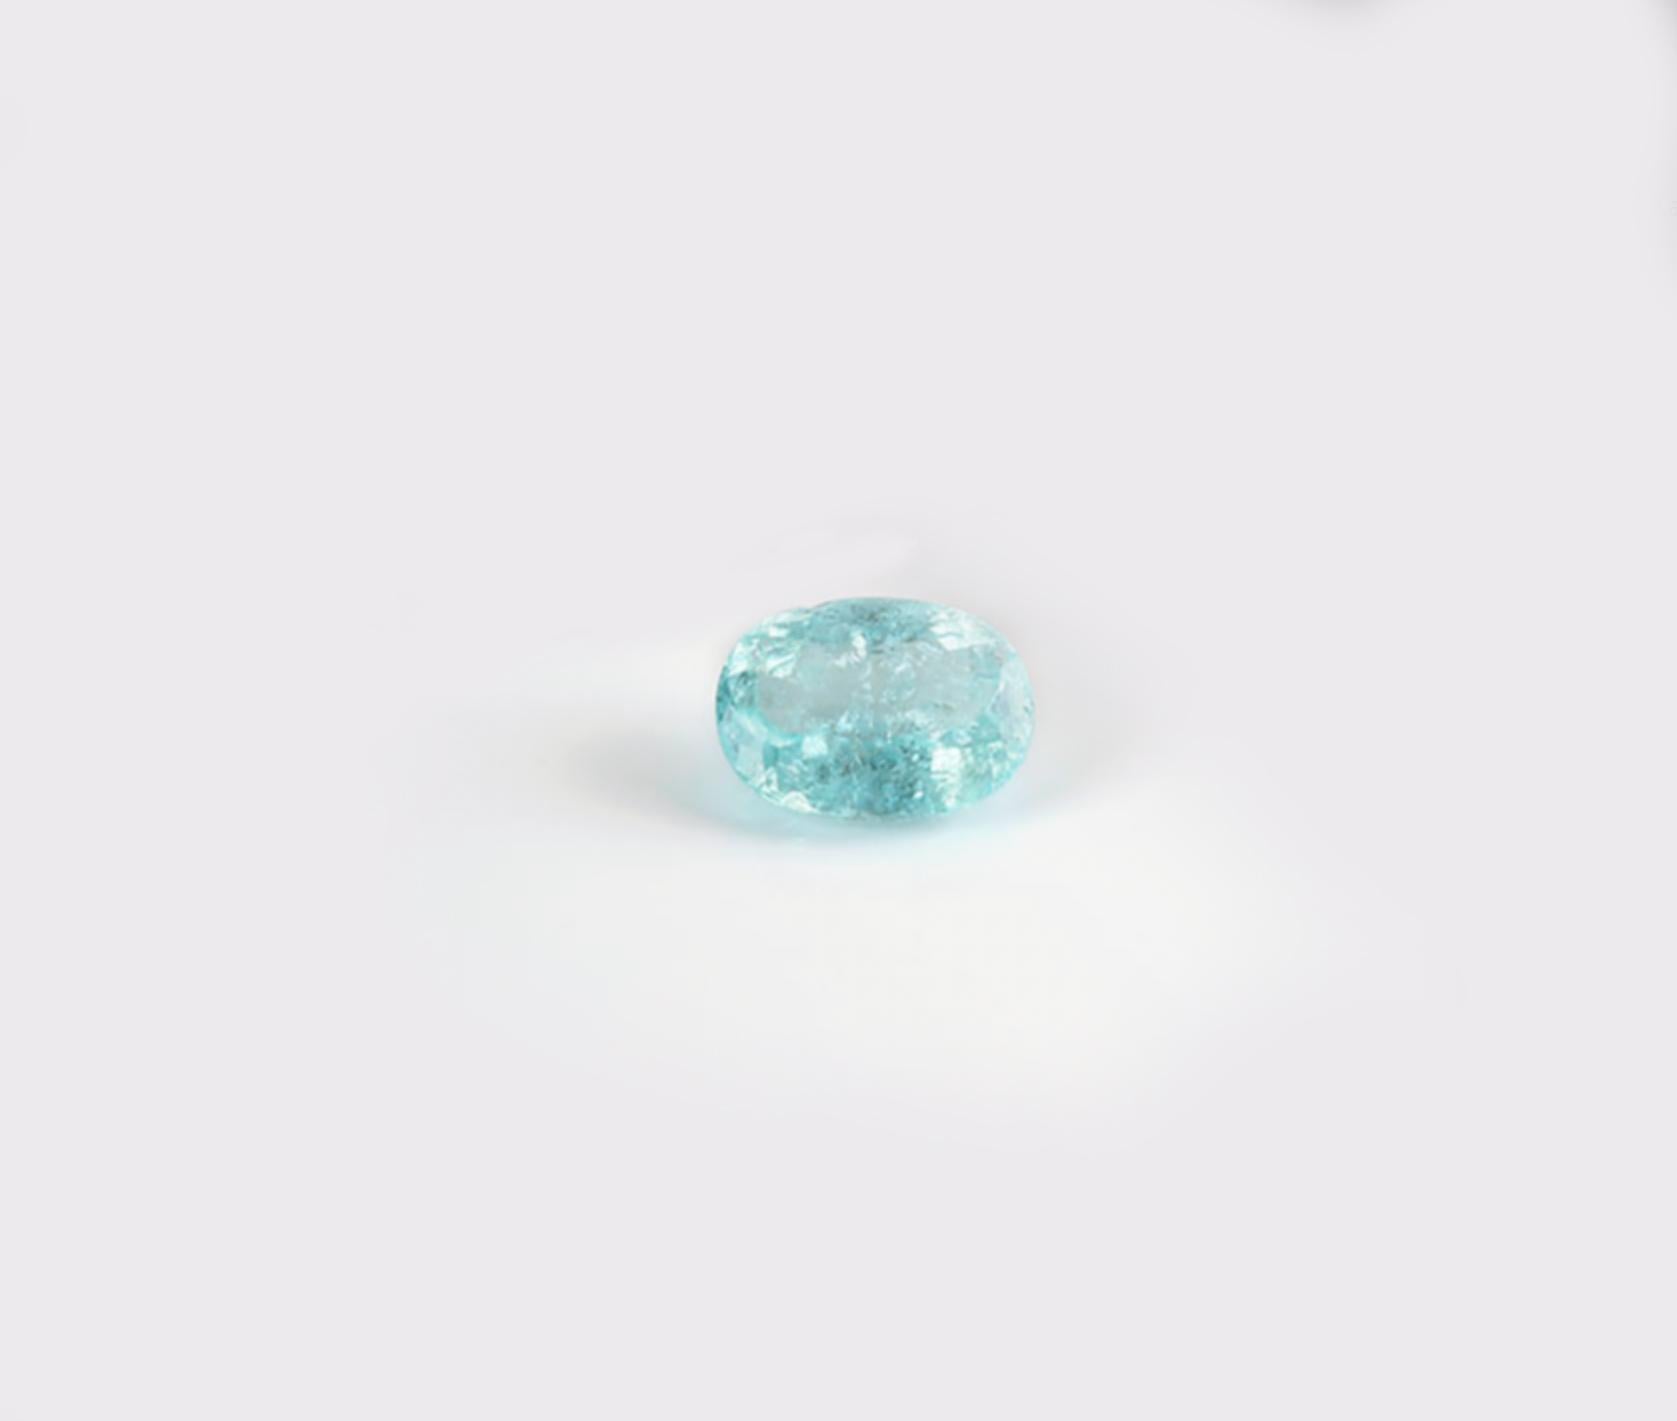 This 18 karat white gold ring features a 4.11 carat neon copper bearing Paraiba tourmaline (12x8.7mm) in an oval cut, with a very blue hue. The gem's impressive size draws attention to the fine jewelry craftsmanship, which includes delicate prongs